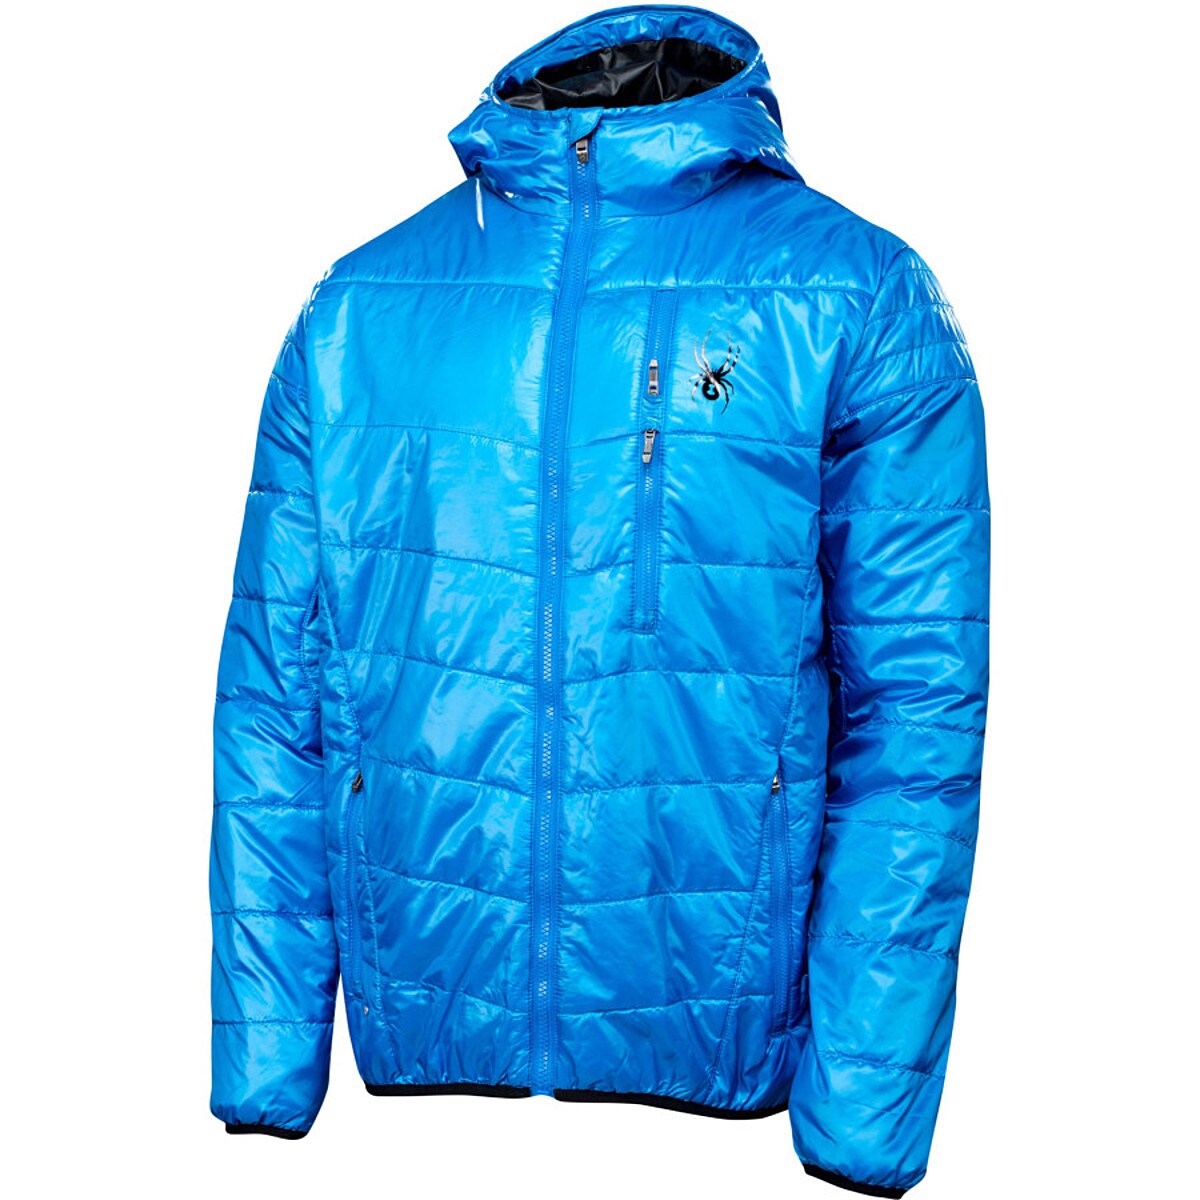 Spyder Mandate Hooded Sweater-Weight Insulated Jacket - Men's